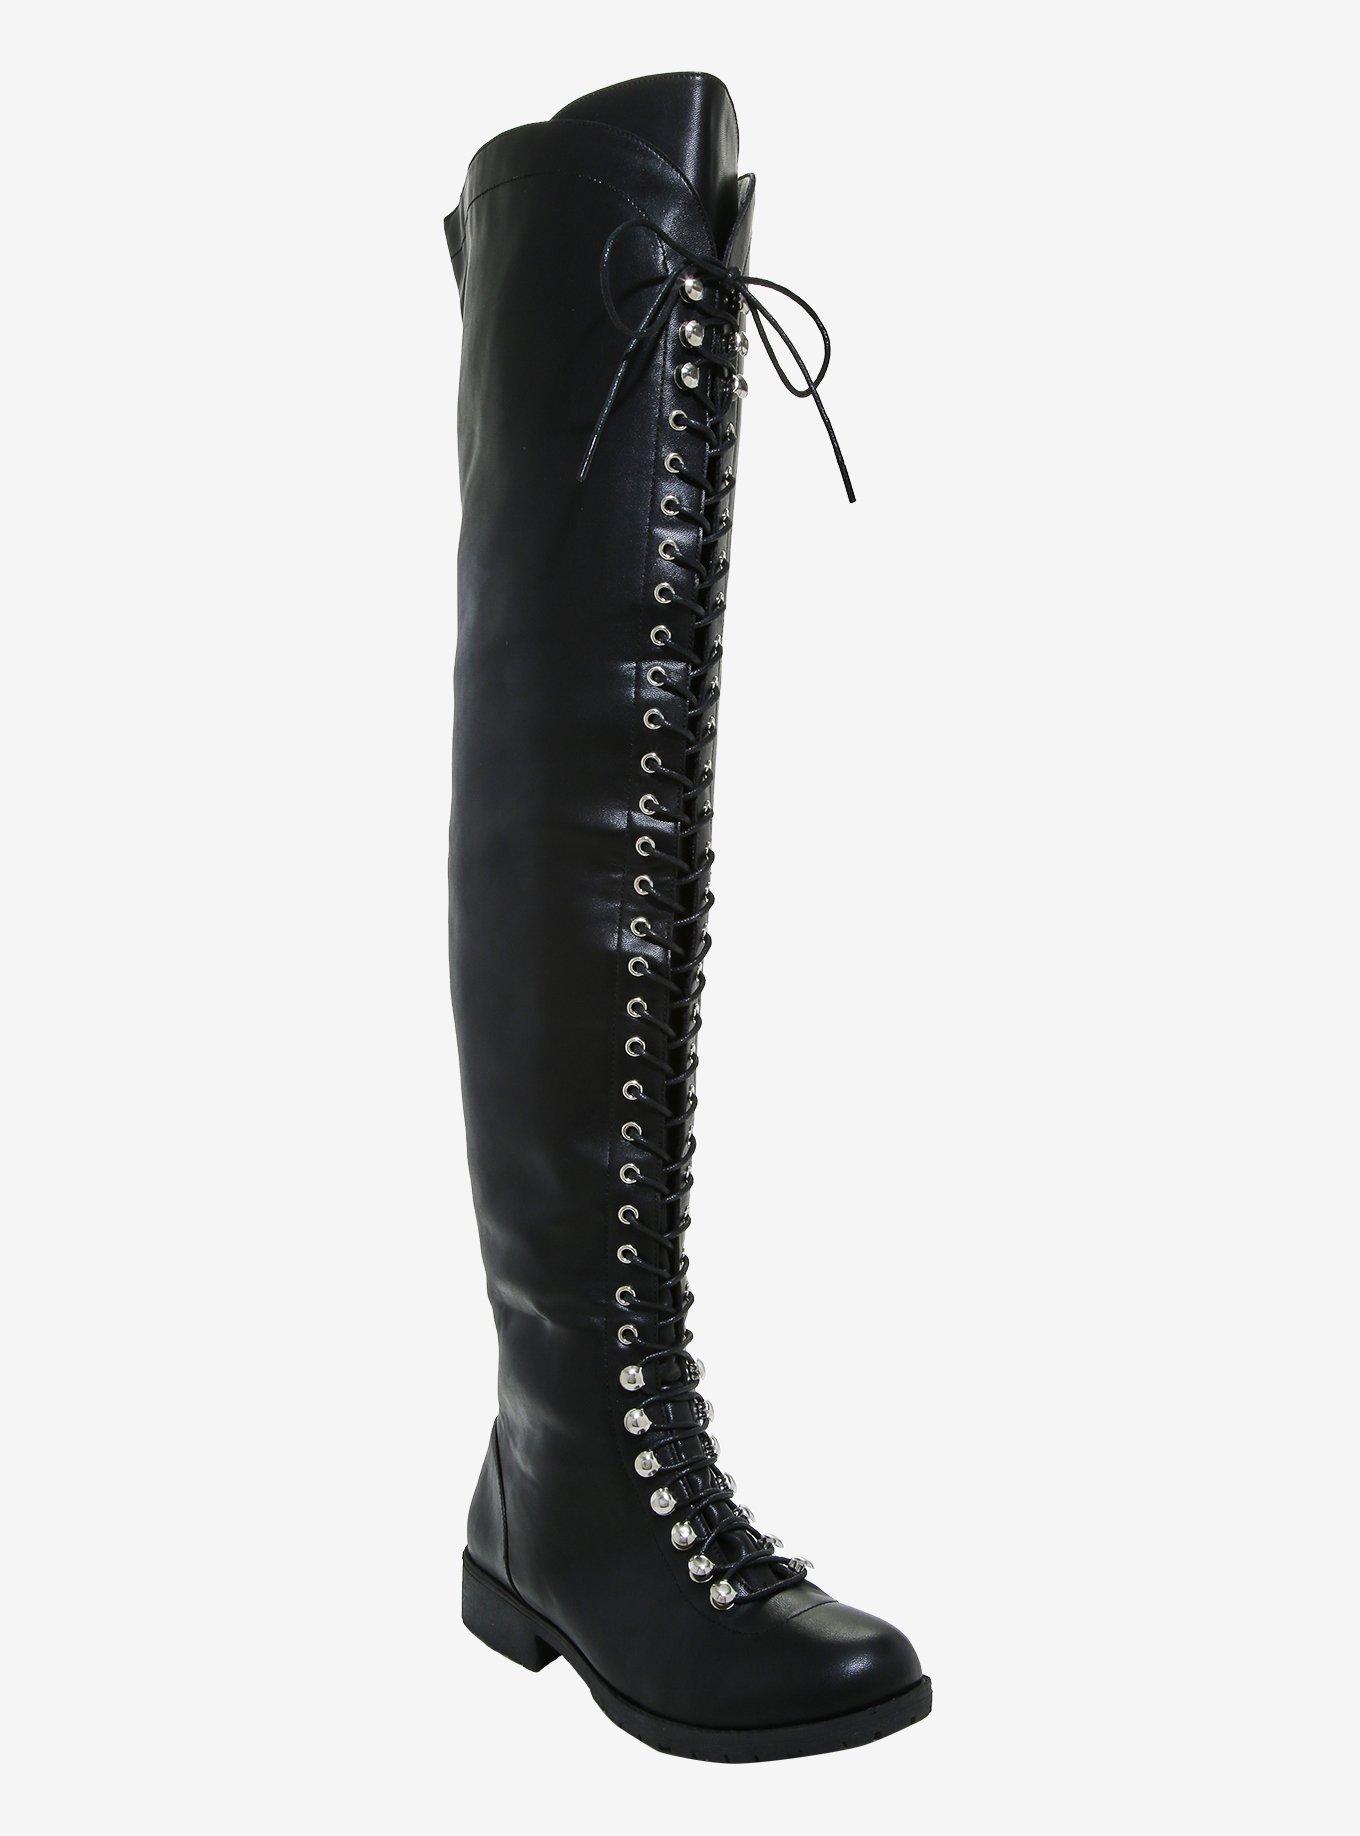 Get Into Action Over-The-Knee Boots, BLACK, hi-res